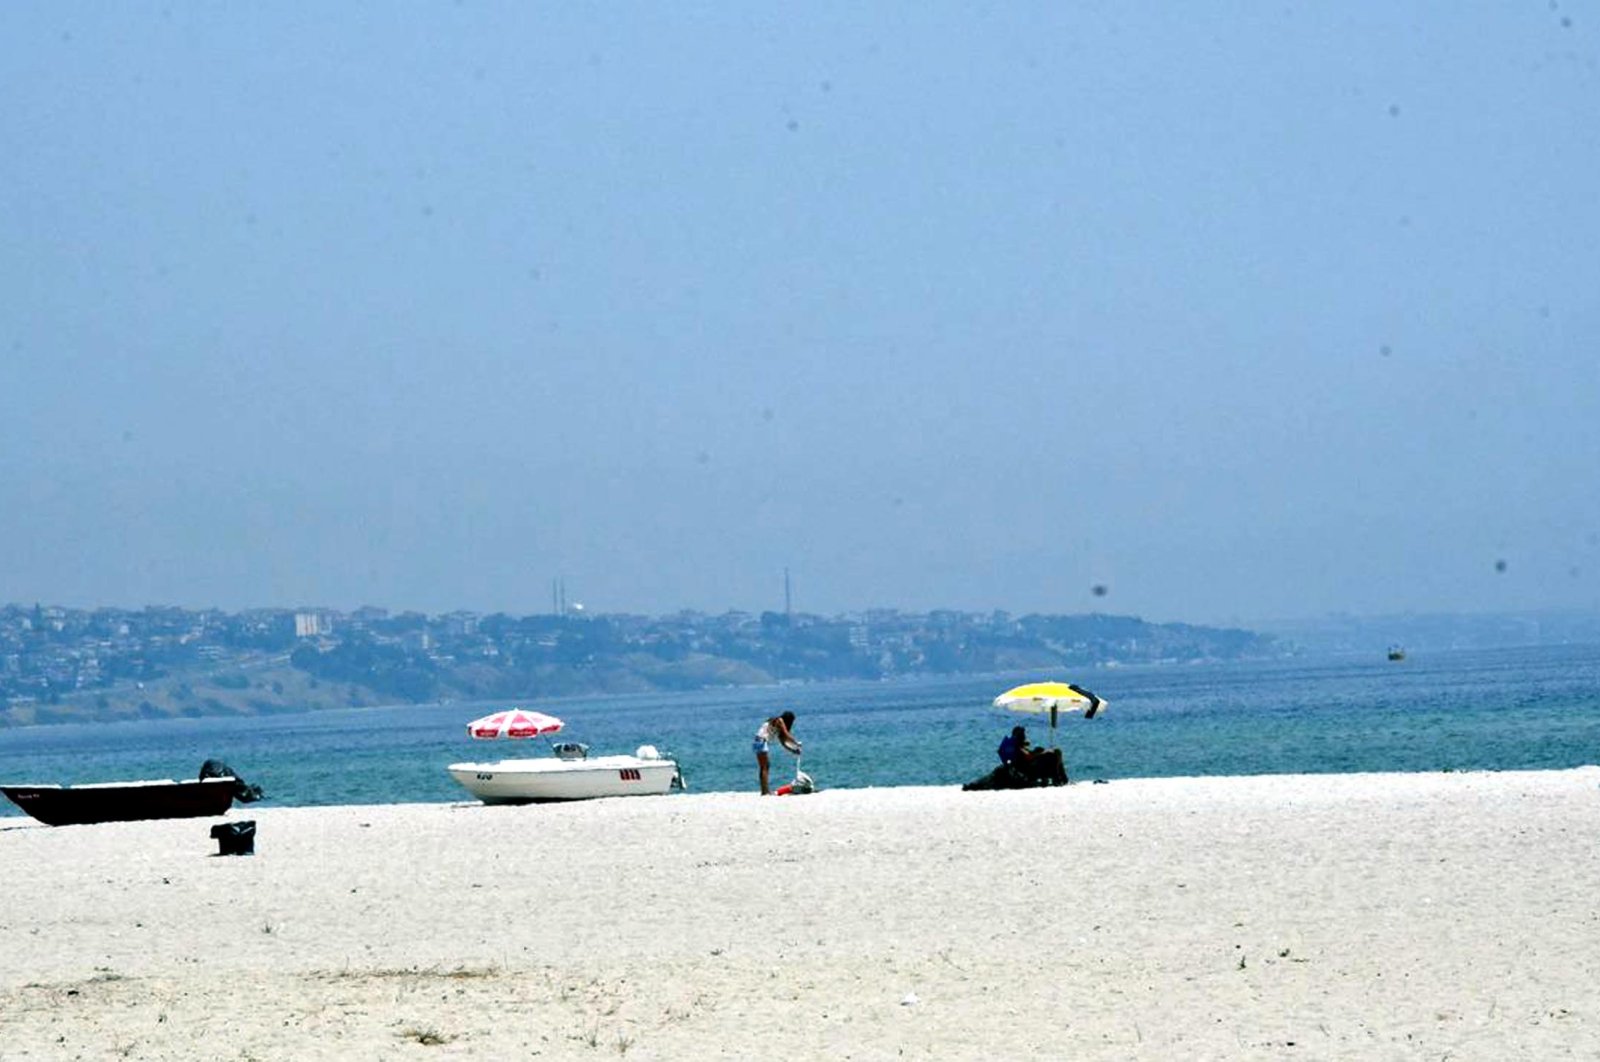 Oxygen depletion, pollution in Marmara Sea spell future crisis: Experts